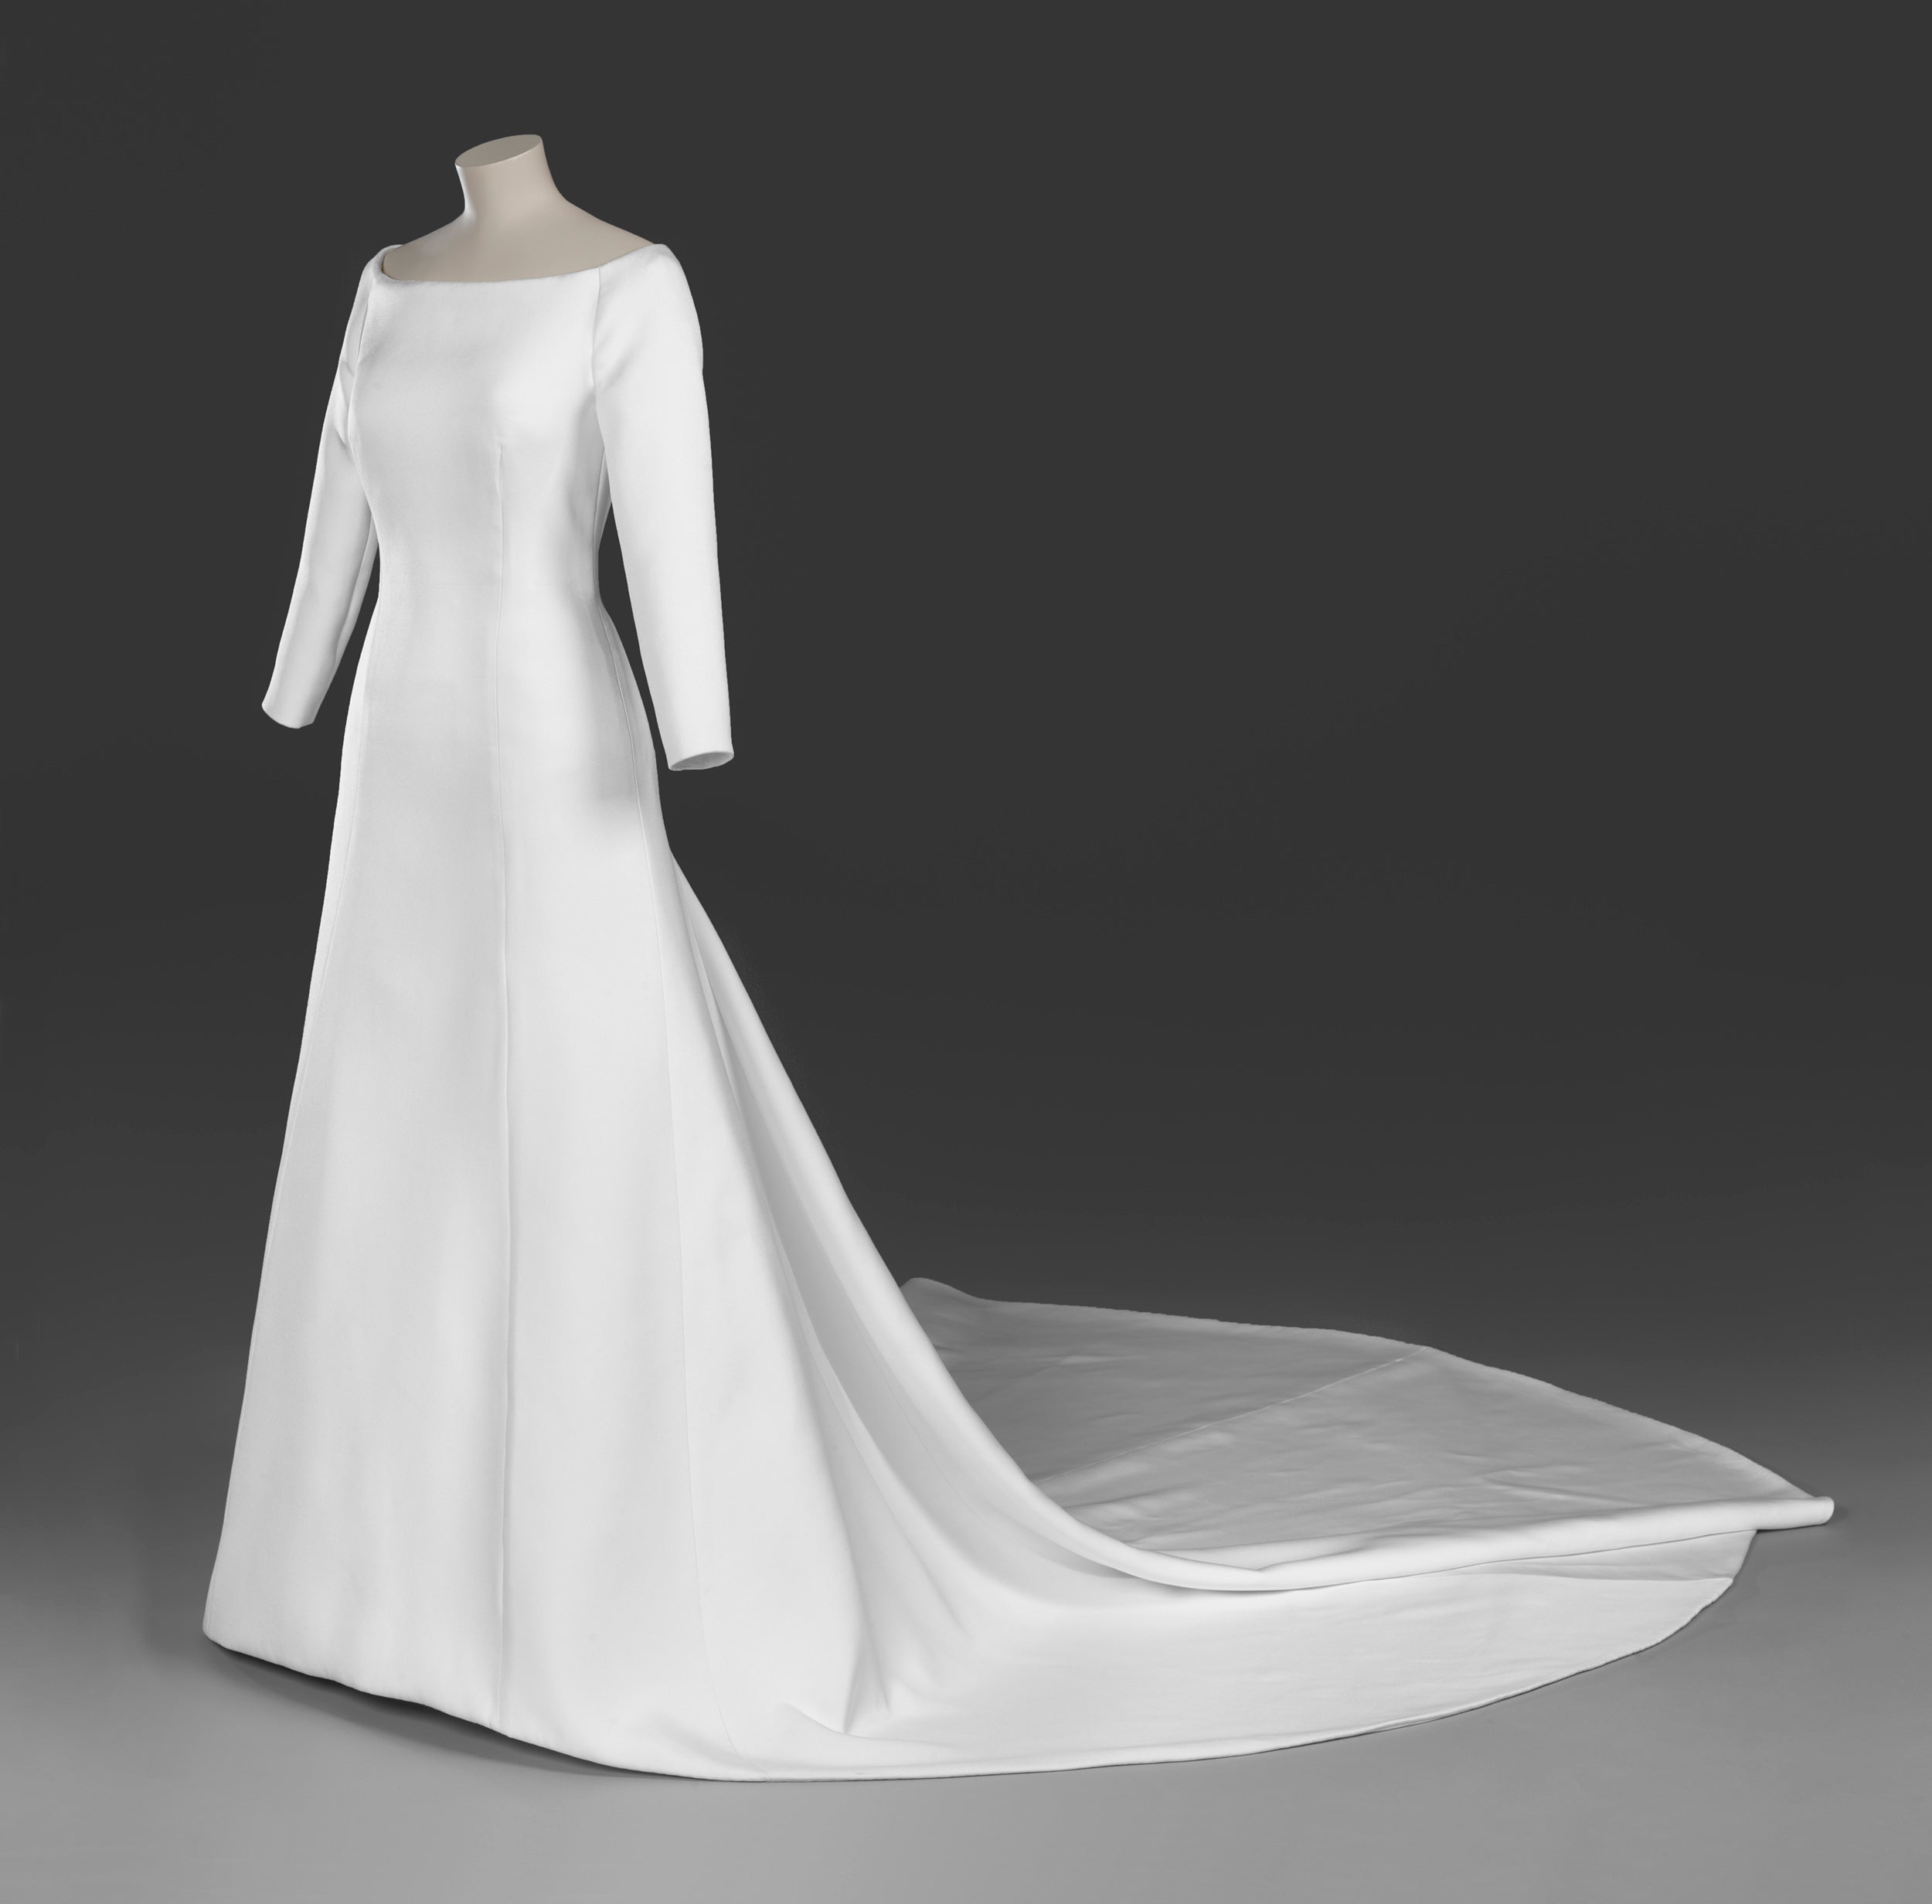 The wedding dress of The Duchess of Sussex, created by the British designer Clare Waight Keller, Artistic Director at the historic French fashion house Givenchy